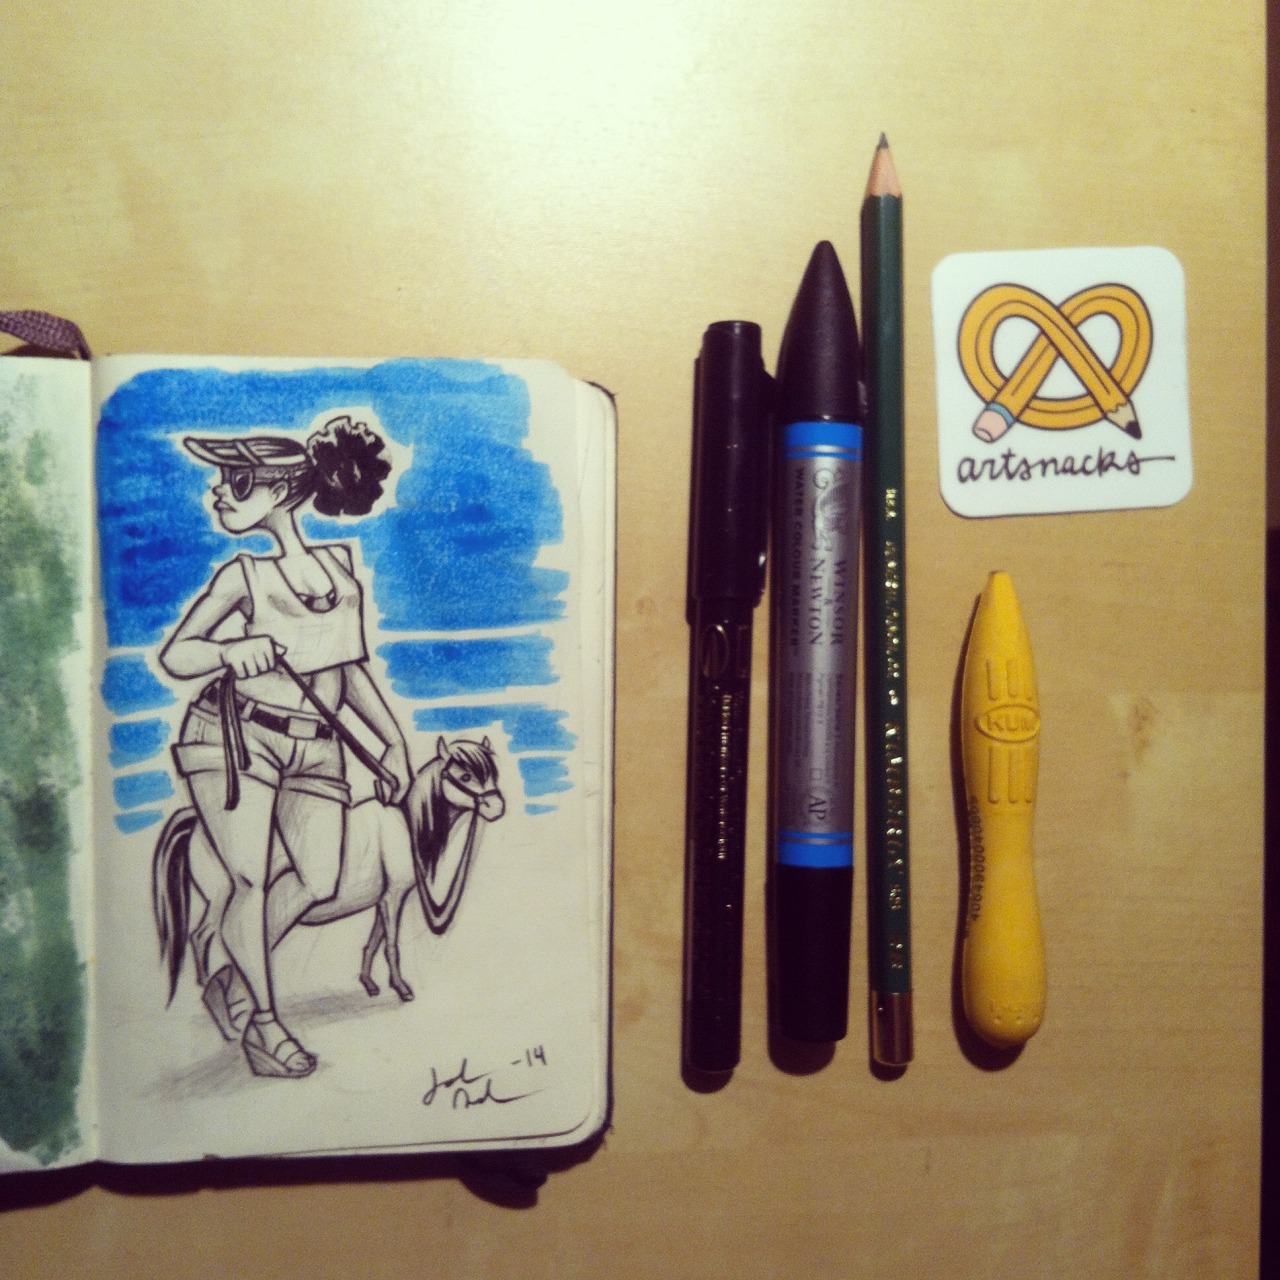 yohunny-art:
“Woman walking her horse.
”
ArtSnacks is like a magazine subscription but instead of a magazine you get 4 or 5 different art products to try out.
Learn more about ArtSnacks here.